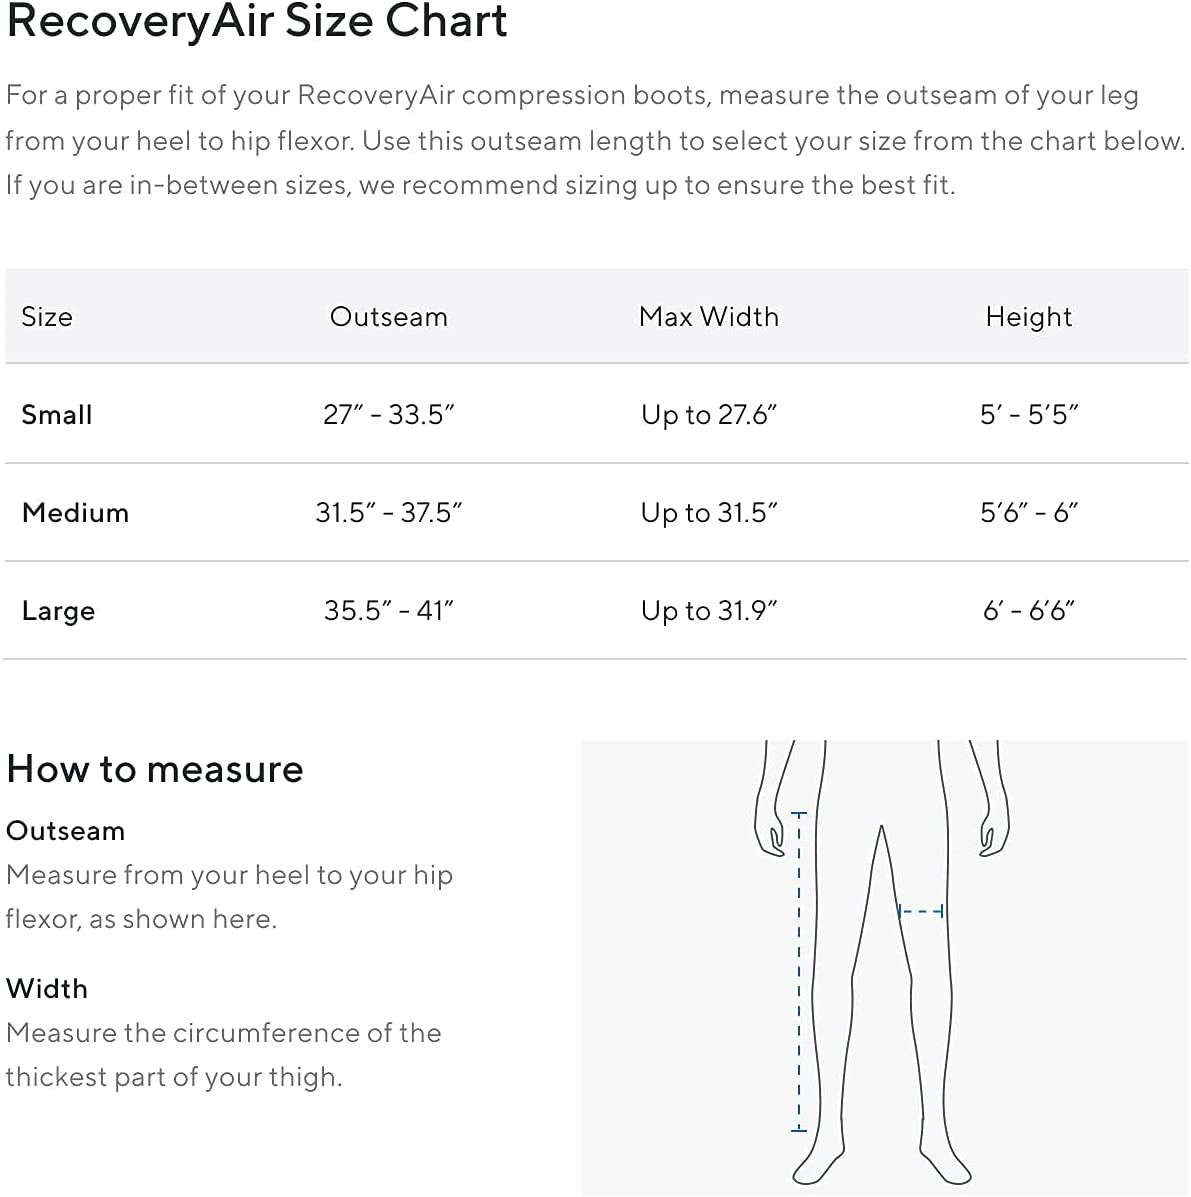 DISCDISCTherabody - RecoveryAir PRO Pneumatic Compression System